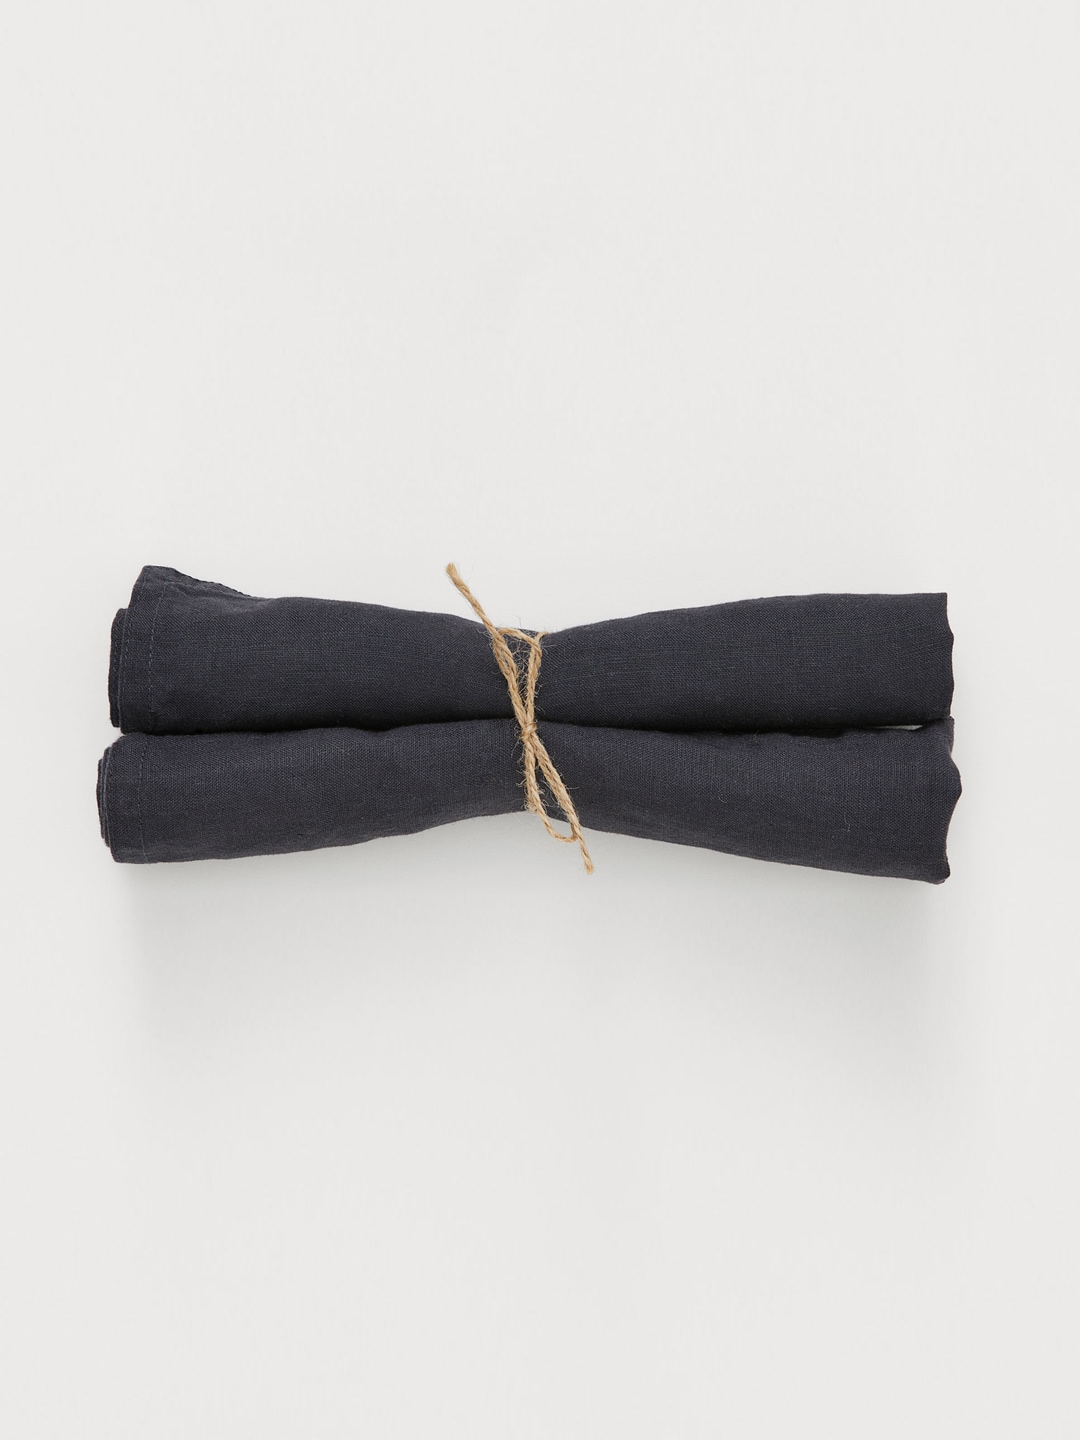 H&M Charcoal Grey 2-Pack Linen Napkins Price in India